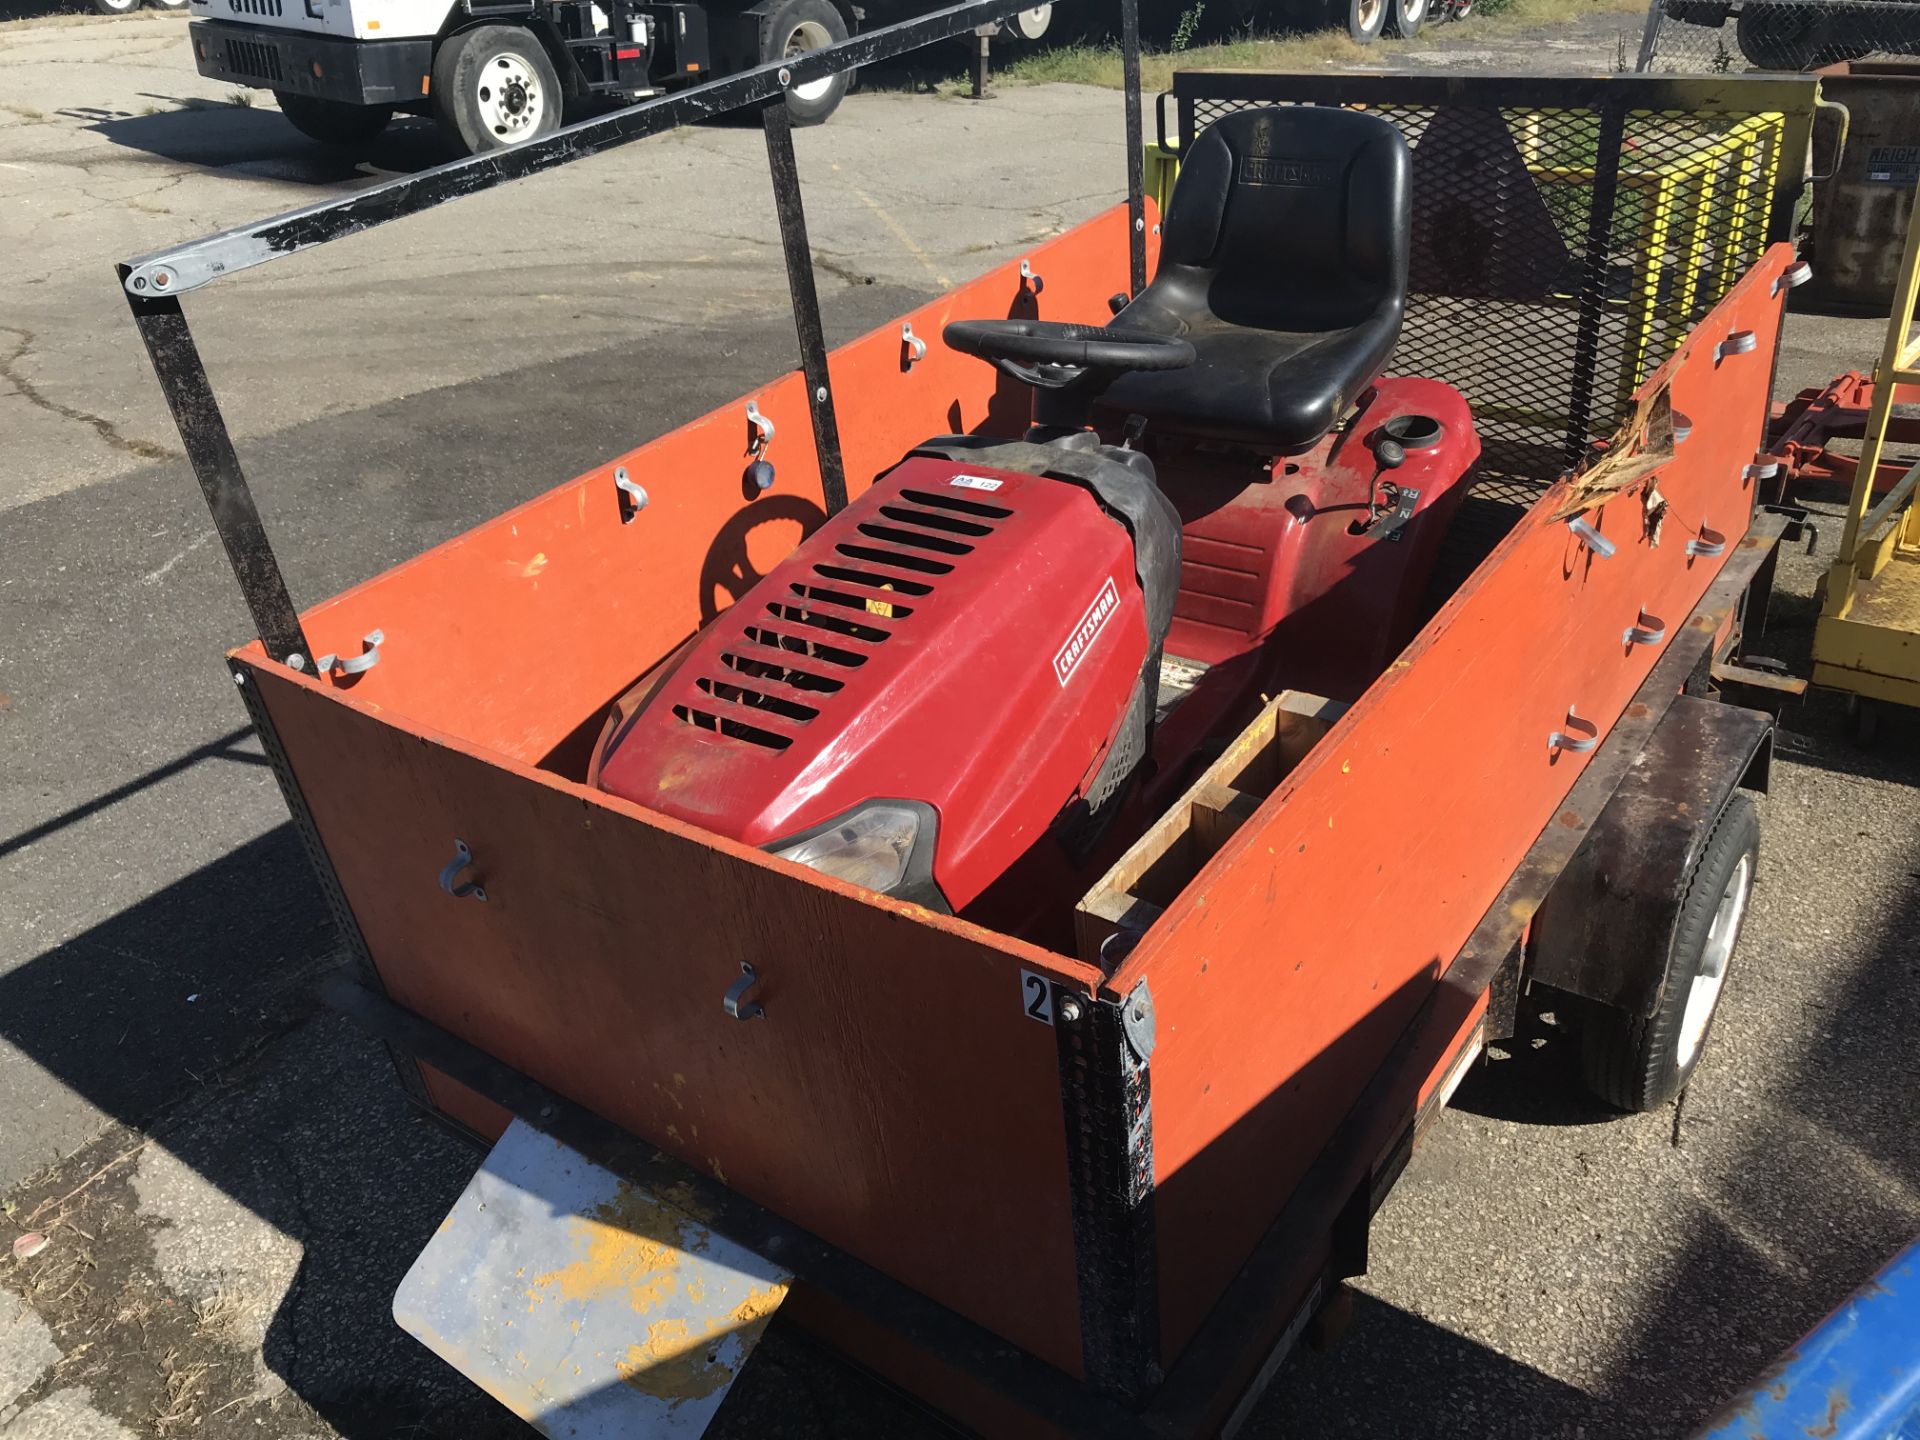 Craftsman Riding Mower with Trailer (Located at 8300 National Highway, Pennsauken, NJ) - Image 2 of 8